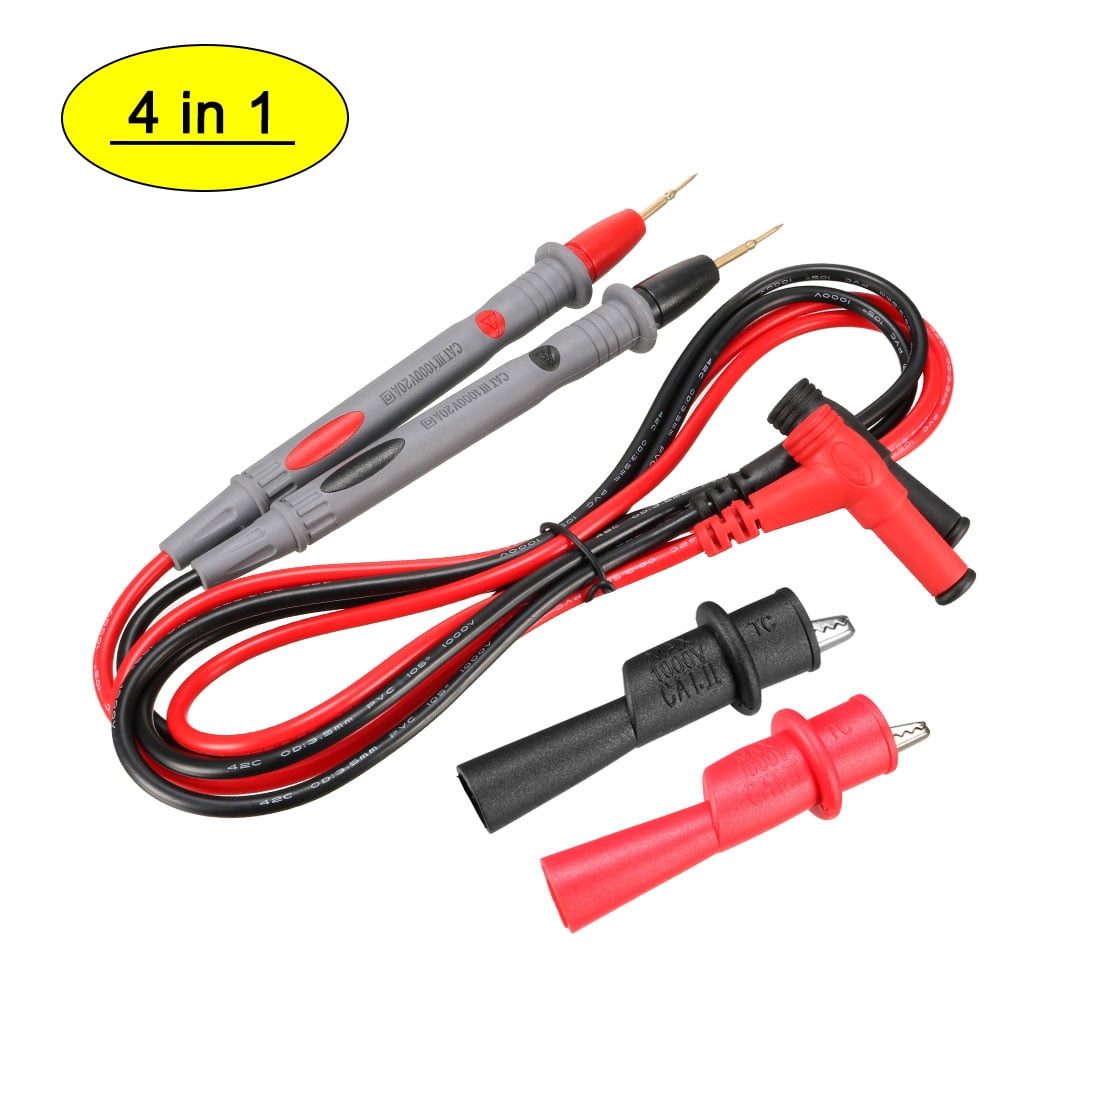 Useful Digital Multimeter Meter Test Electric Lead Probe Wire Pen Cable t#s 